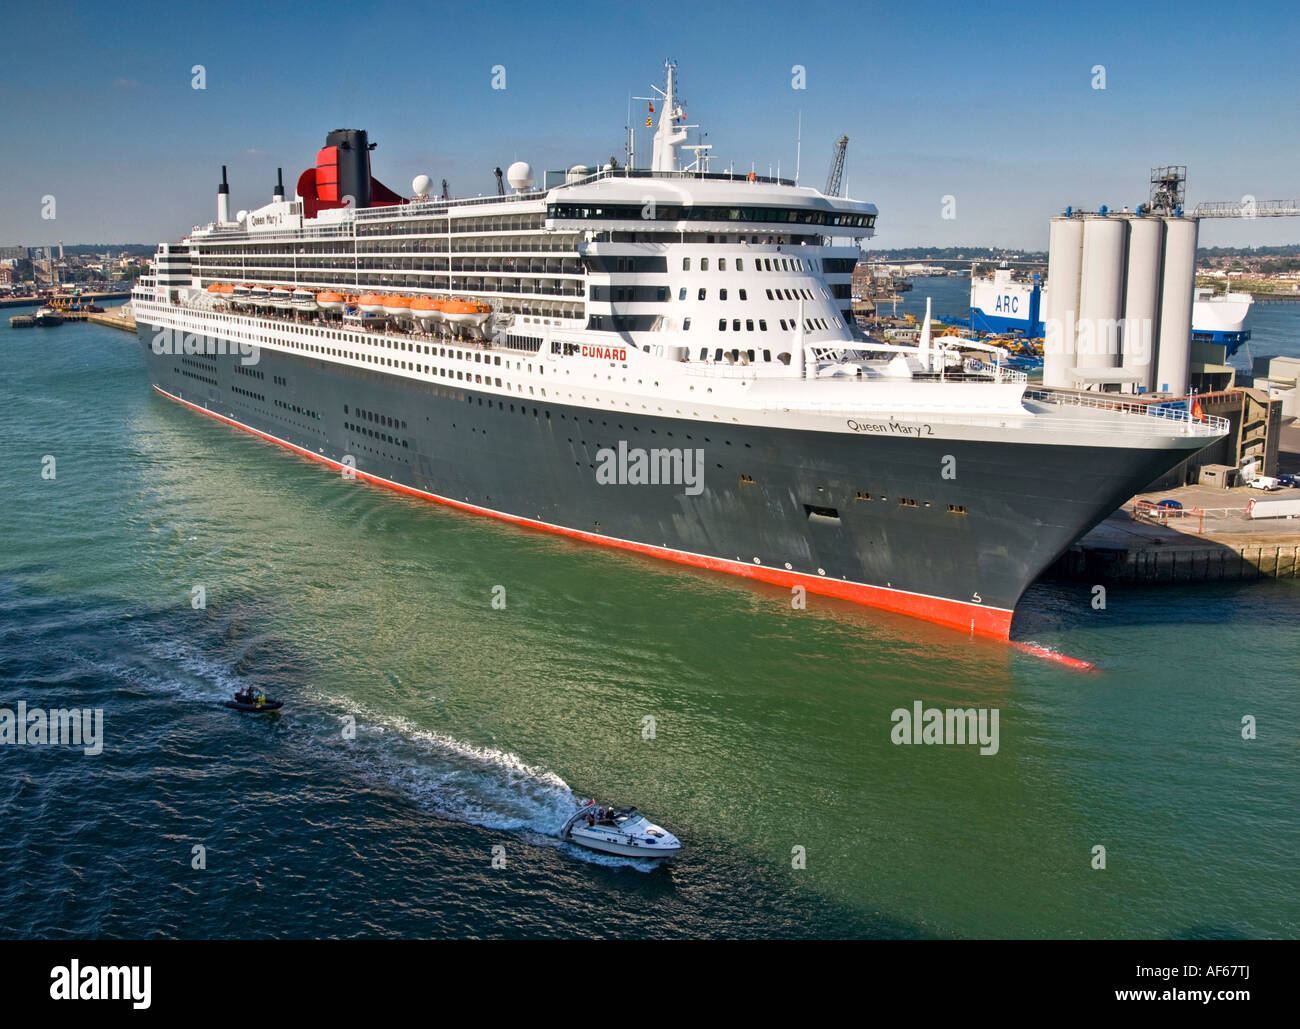 The Cunard cruise liner the Queen Mary 2 docked at Southampton in the U